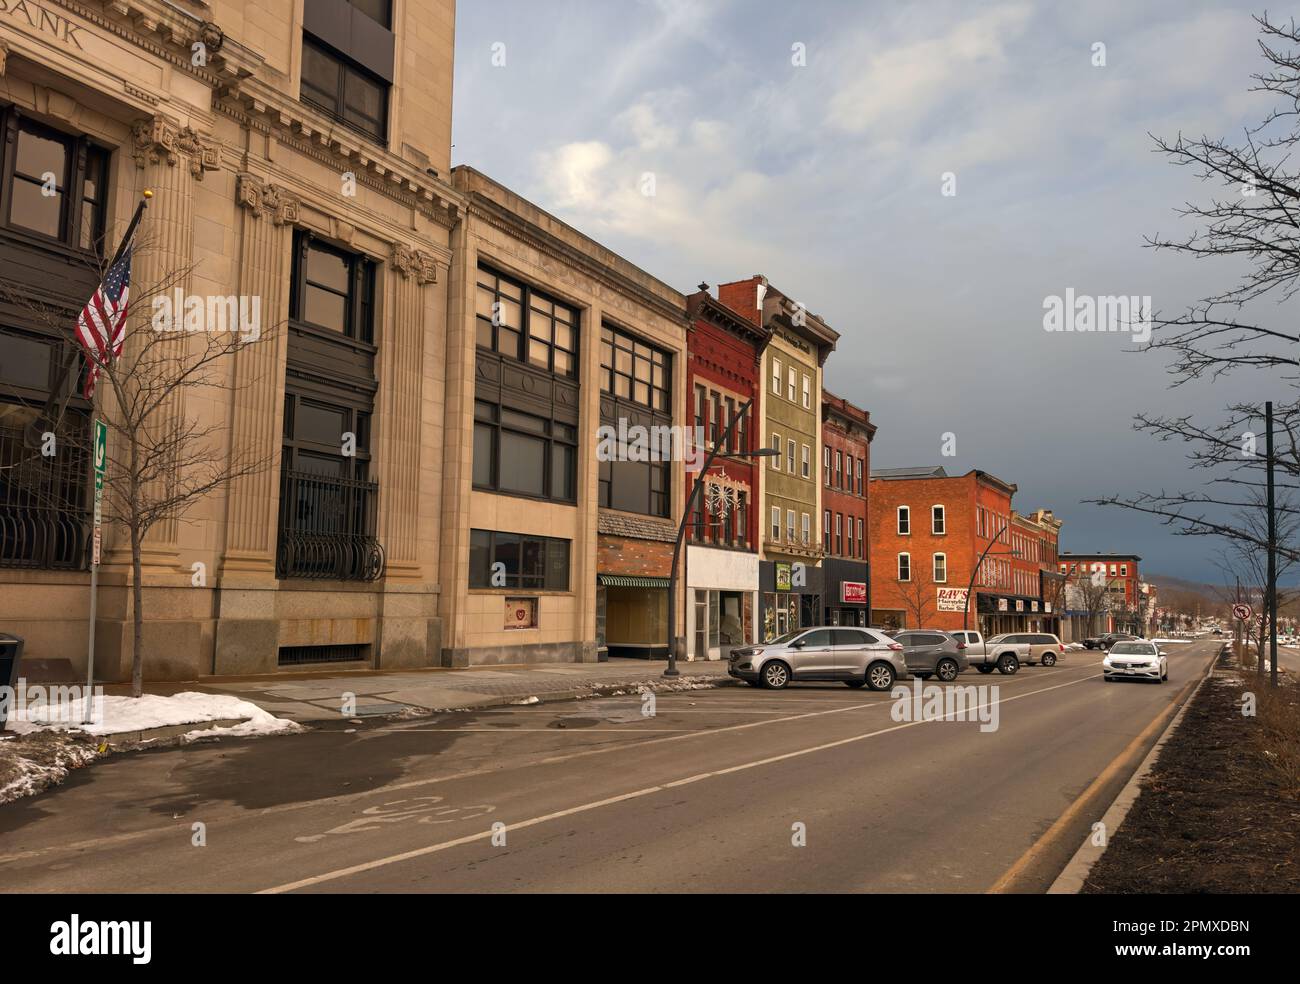 The facades along North Union St in Olean New York  present varying degrees of economic stress and revitalization. Stock Photo